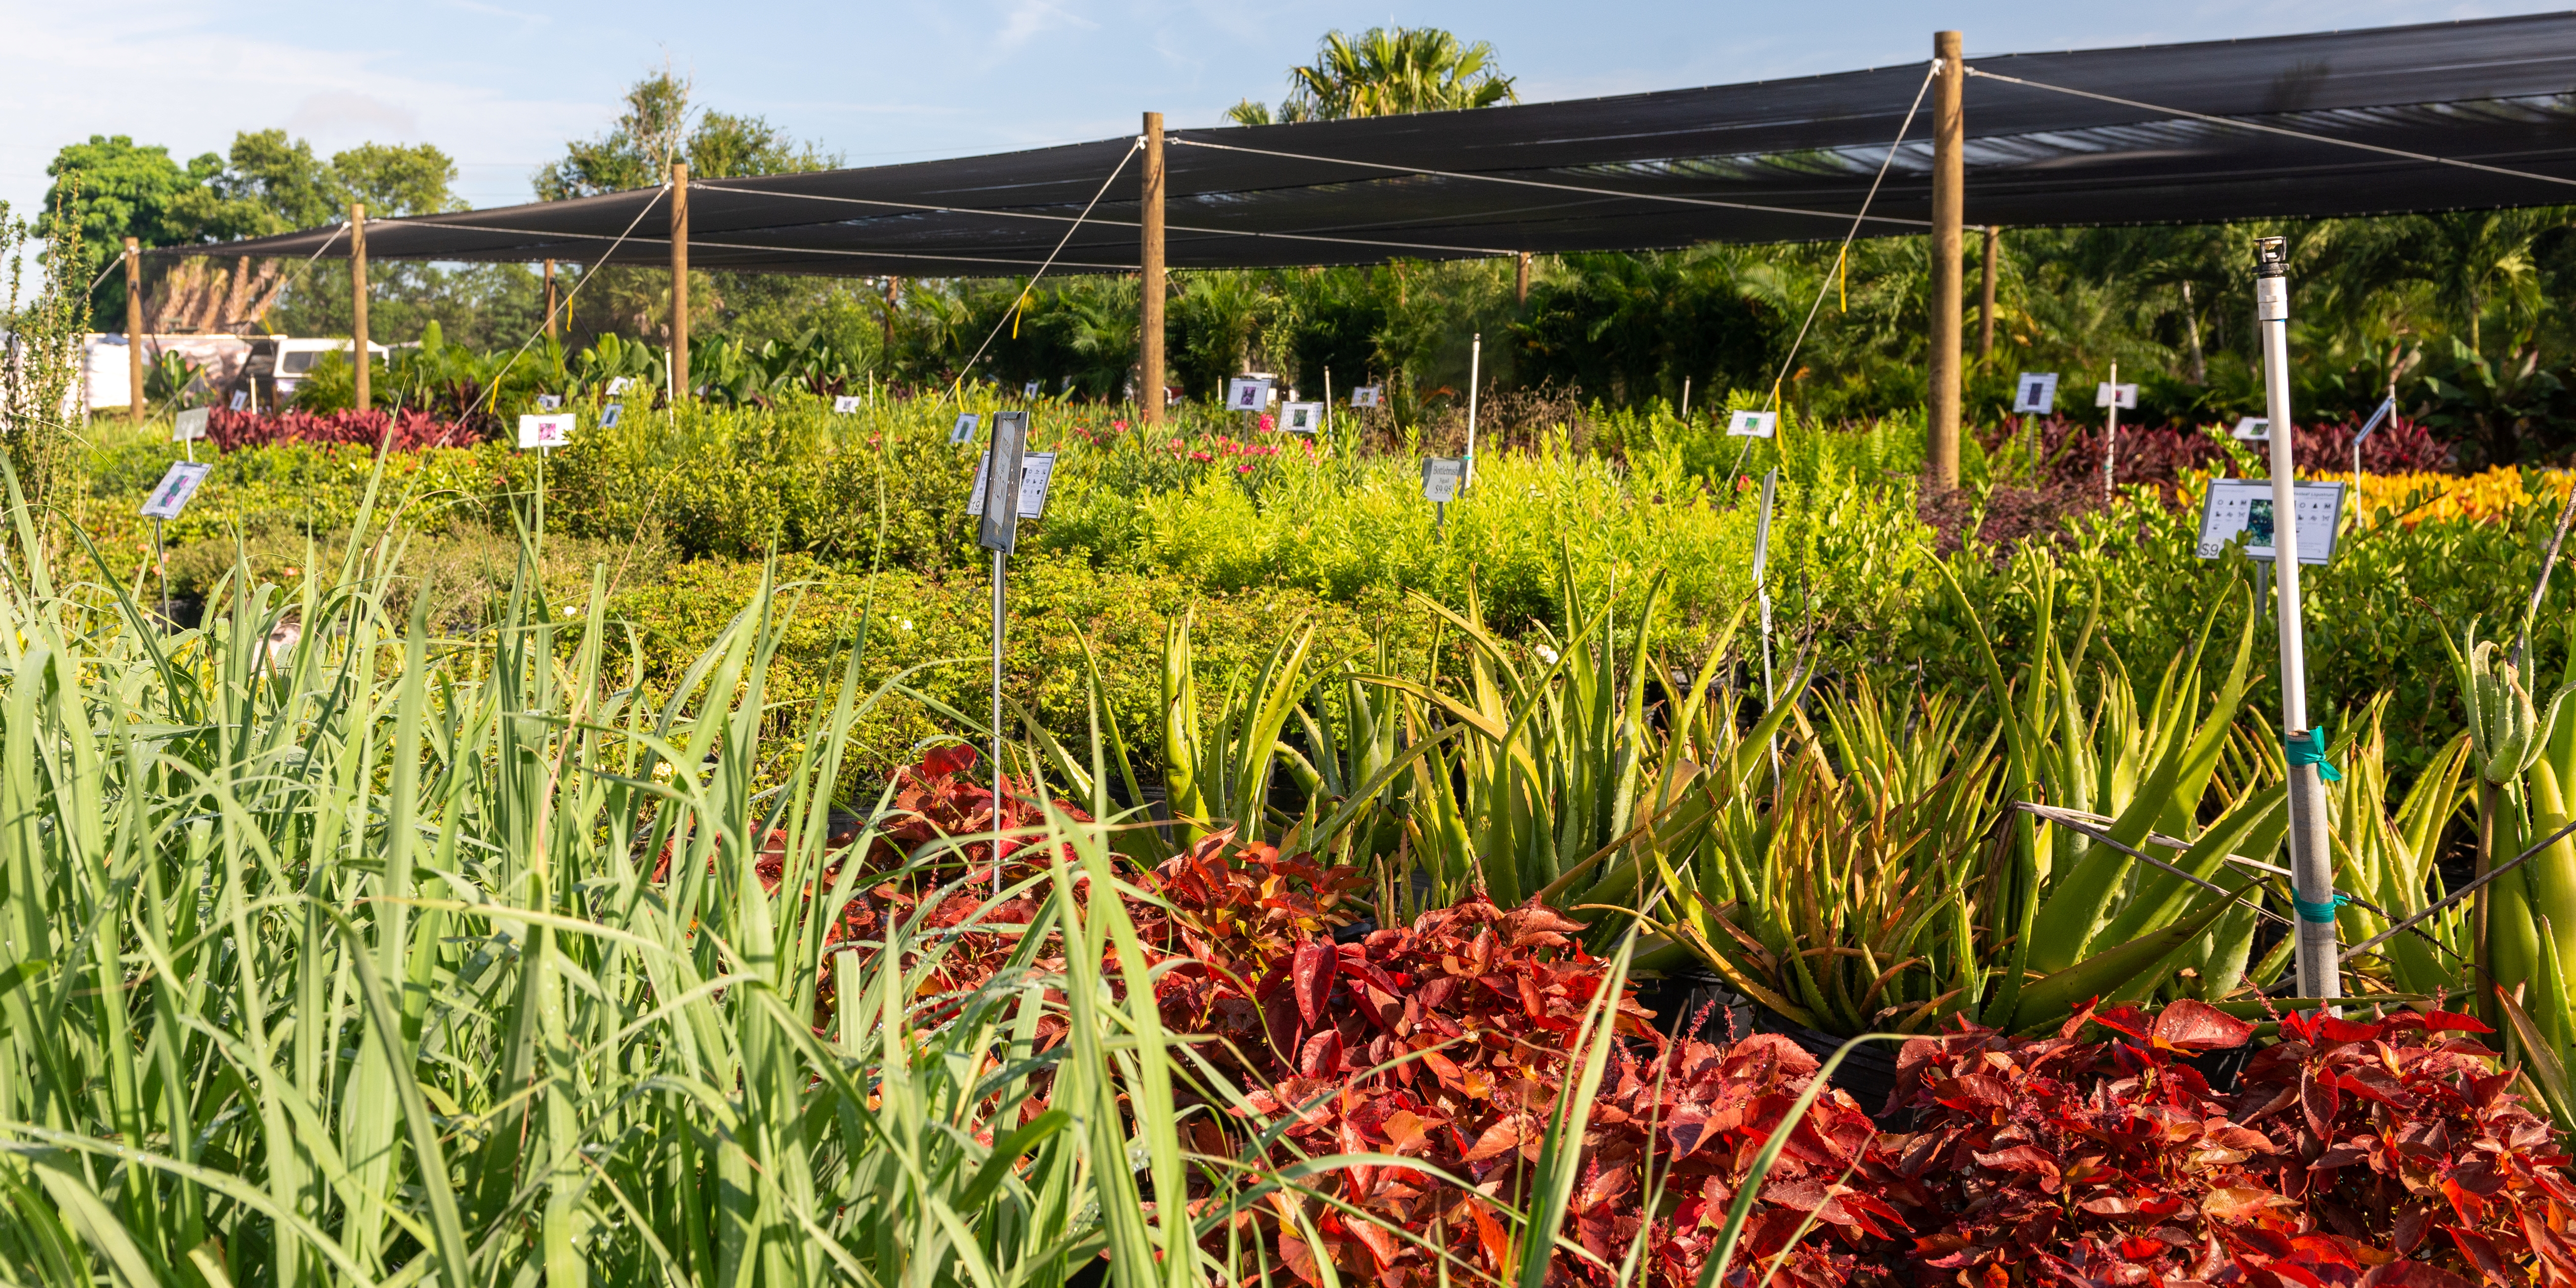 Many plant options that are on display at our nursery in Orlando, FL.